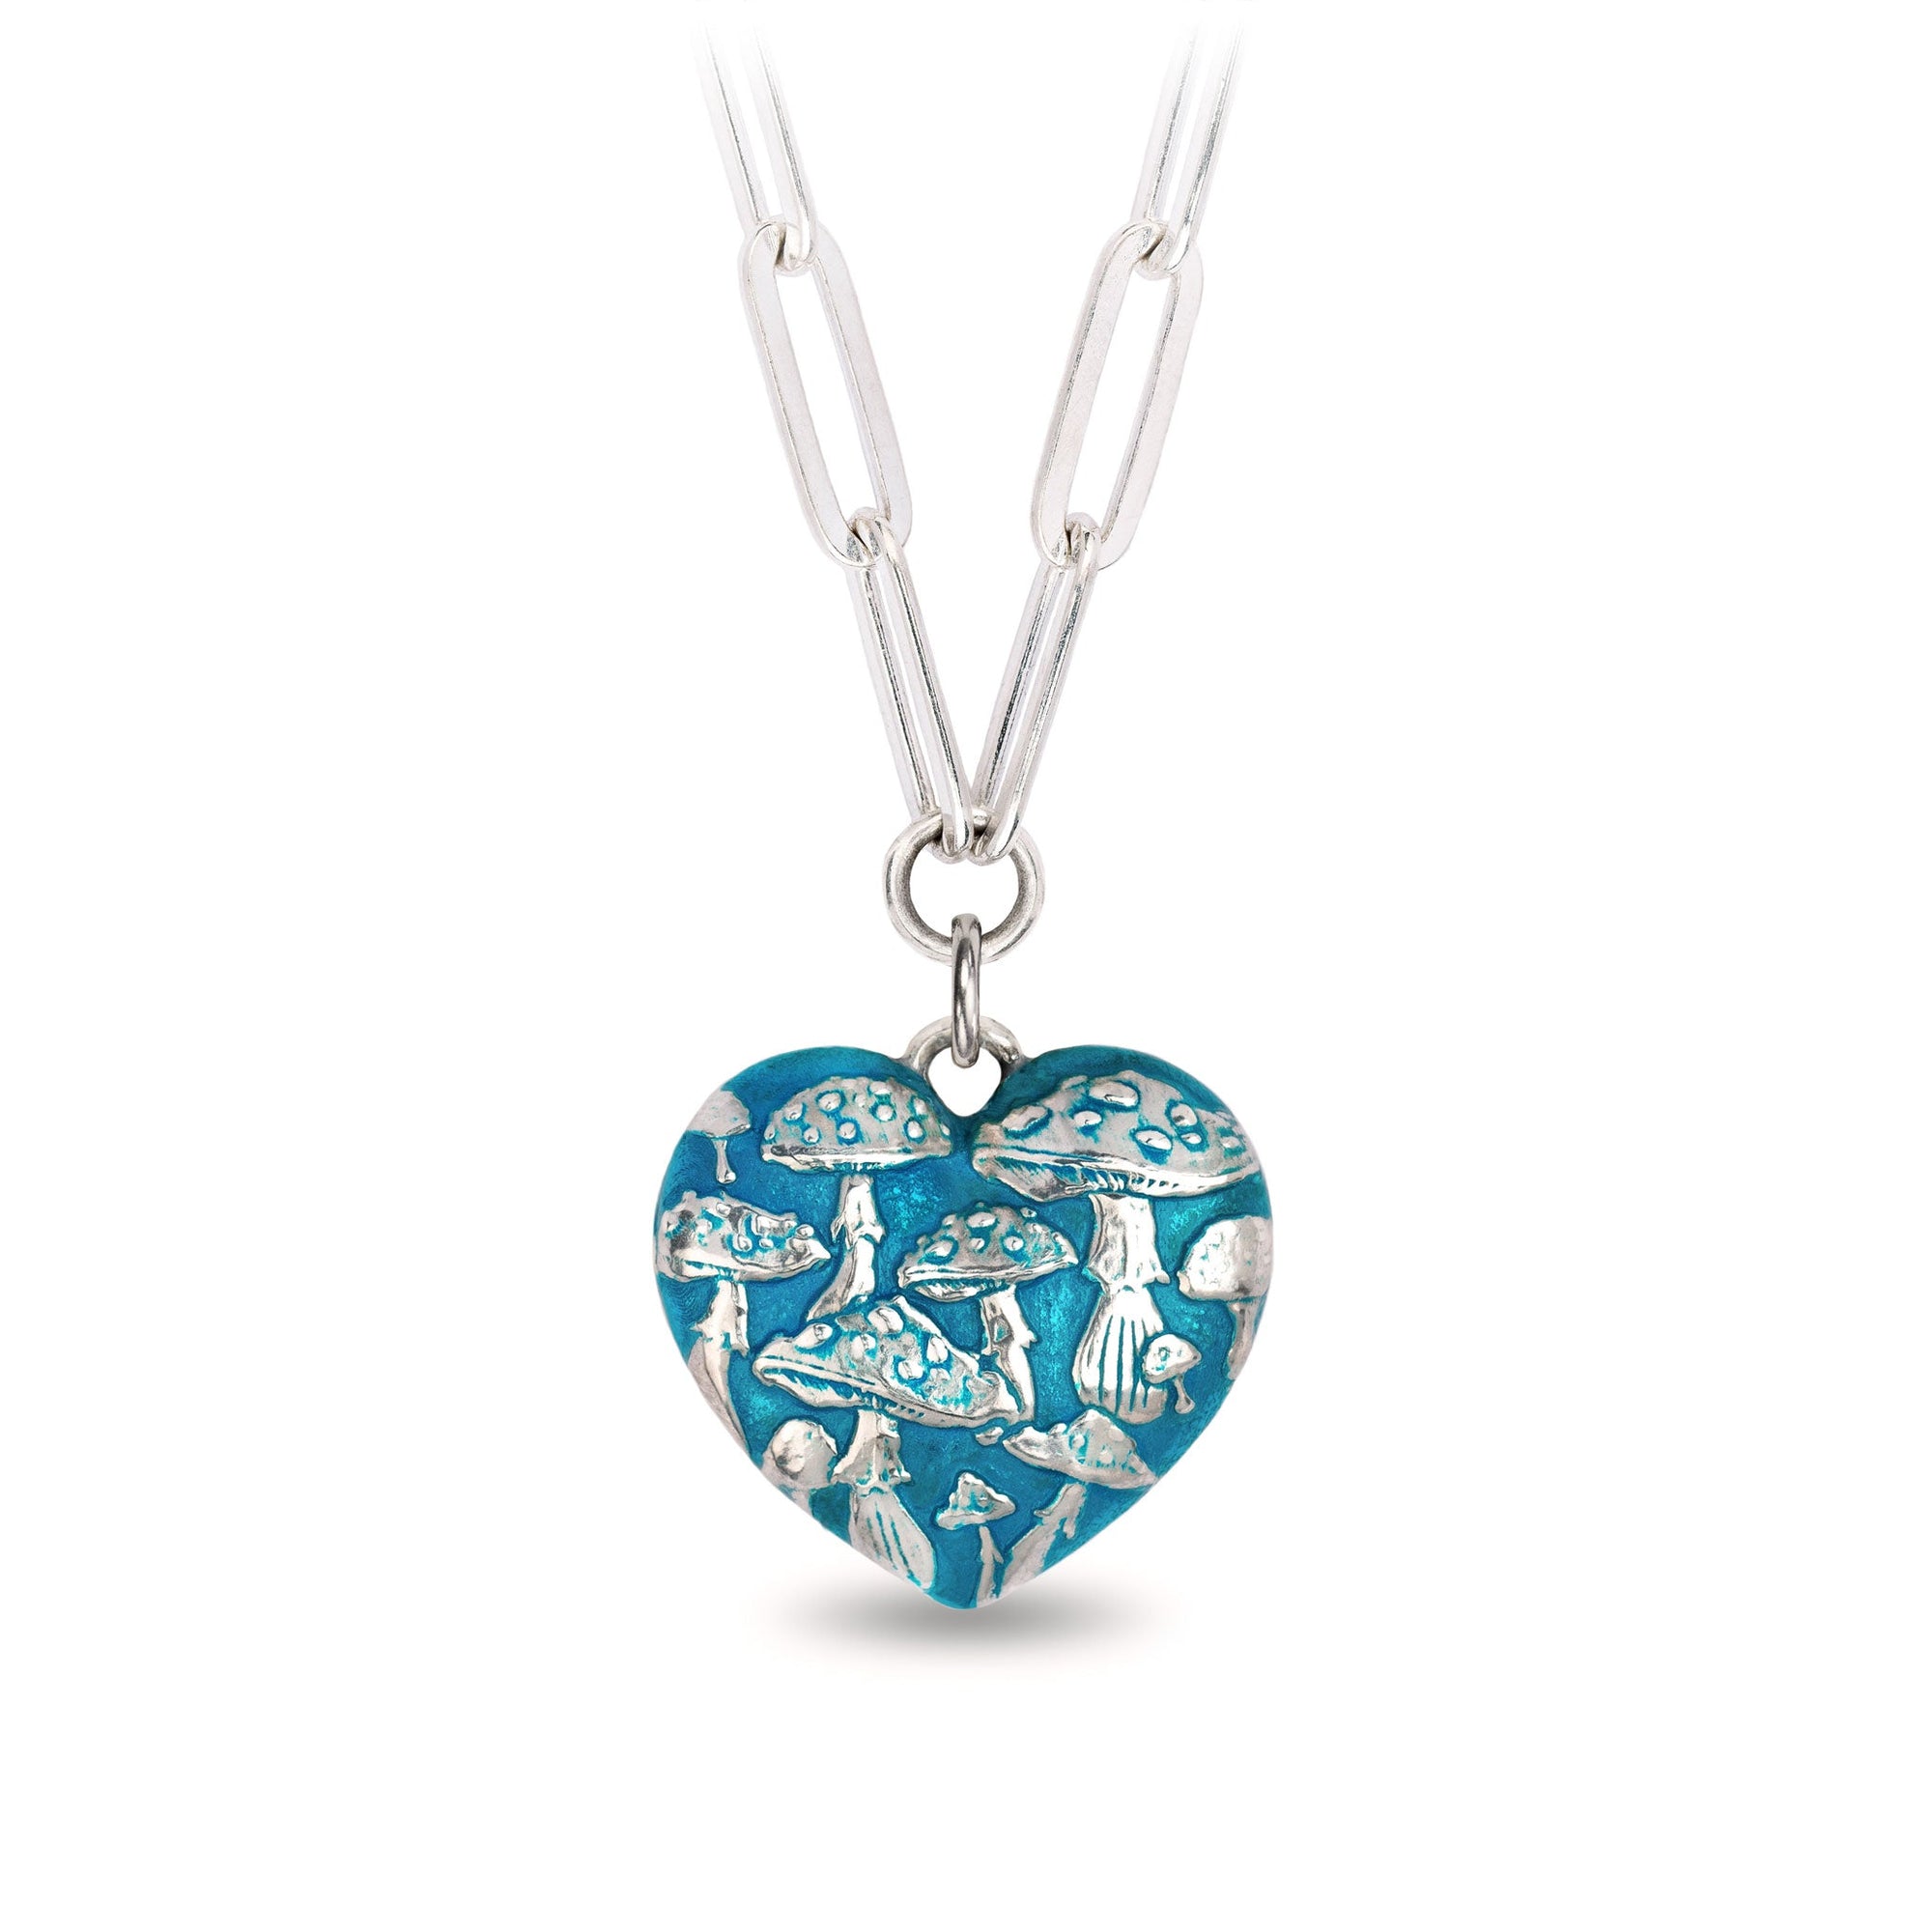 Mushroom Large Puffed Heart Large Paperclip Chain Necklace - Capri Blue